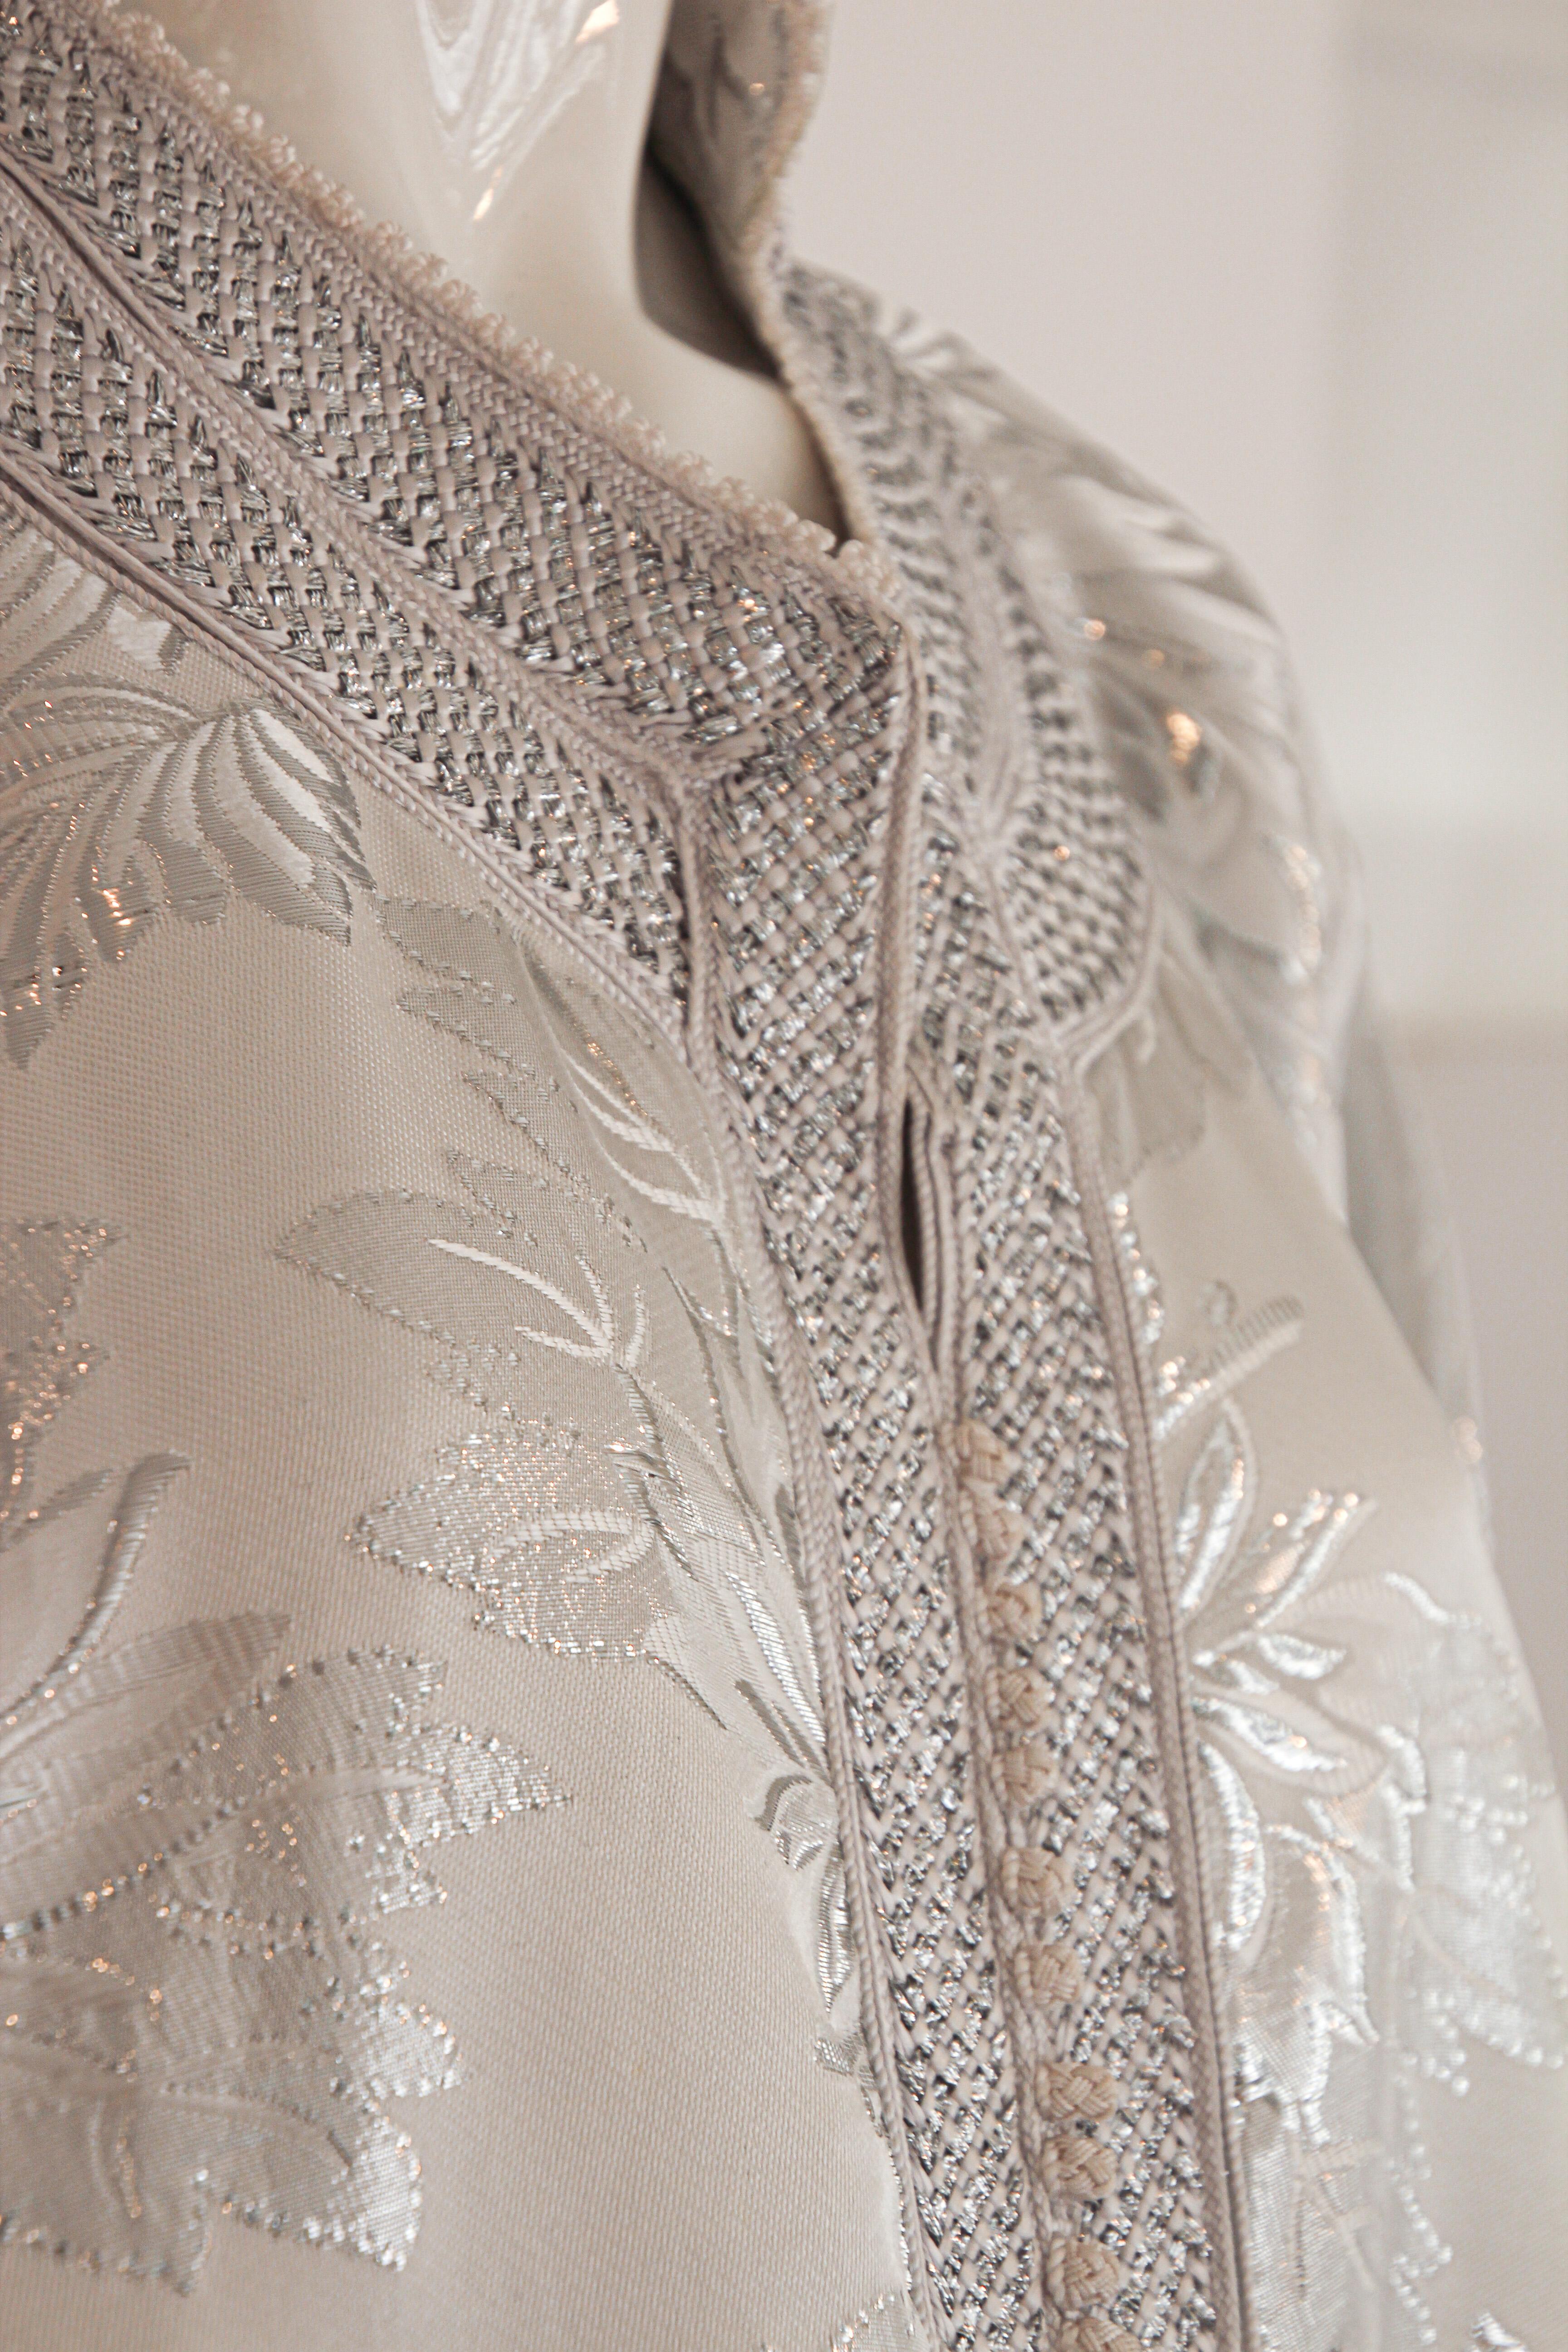 Moroccan Caftan Silver Damask Embroidered, Vintage, 1960s 6